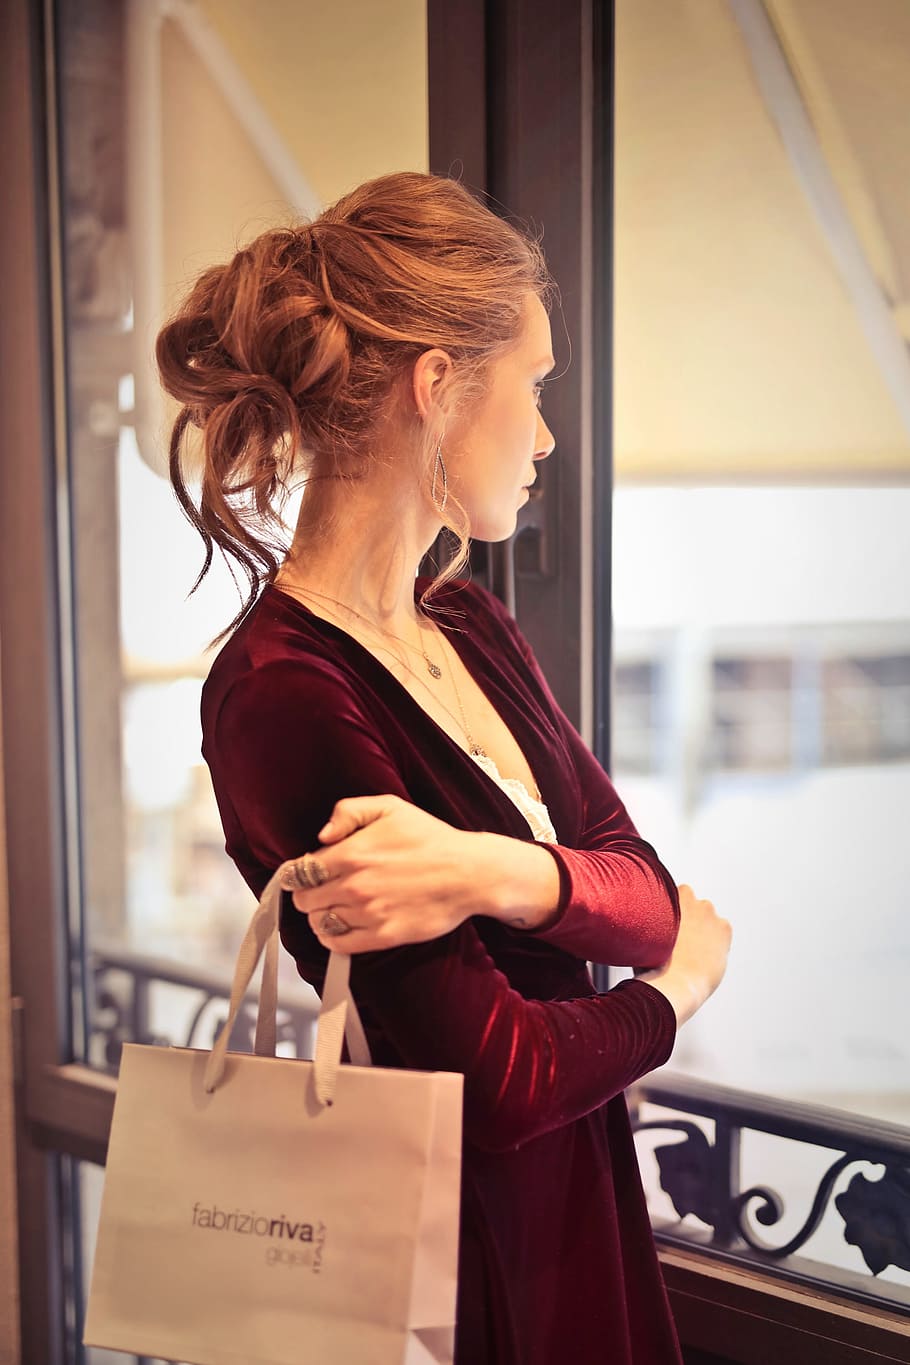 A young blond woman with elegant hair bun wearing a satin dress holding shopping bag in her hand looks out of the windows, HD wallpaper